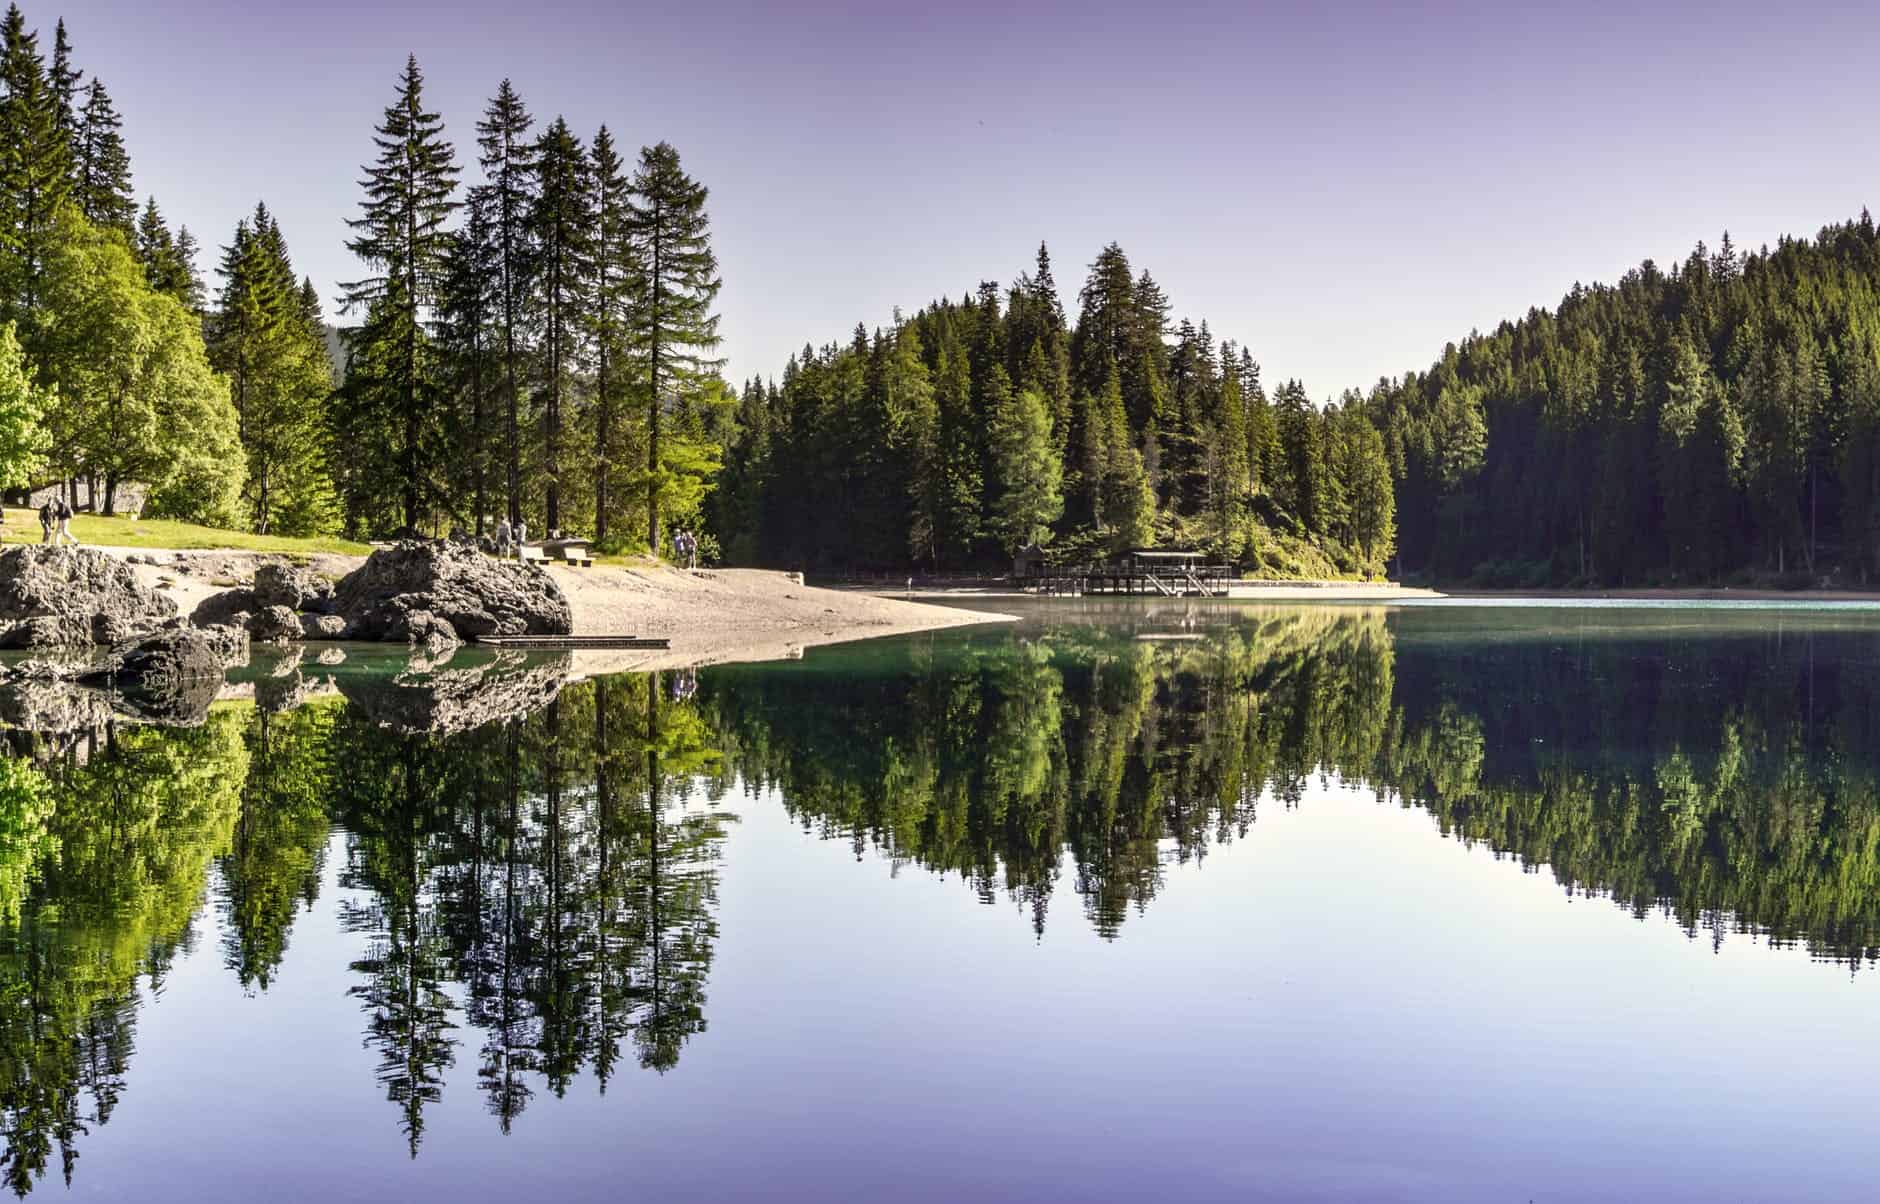 A body of water surrounded by trees reflecting in the water